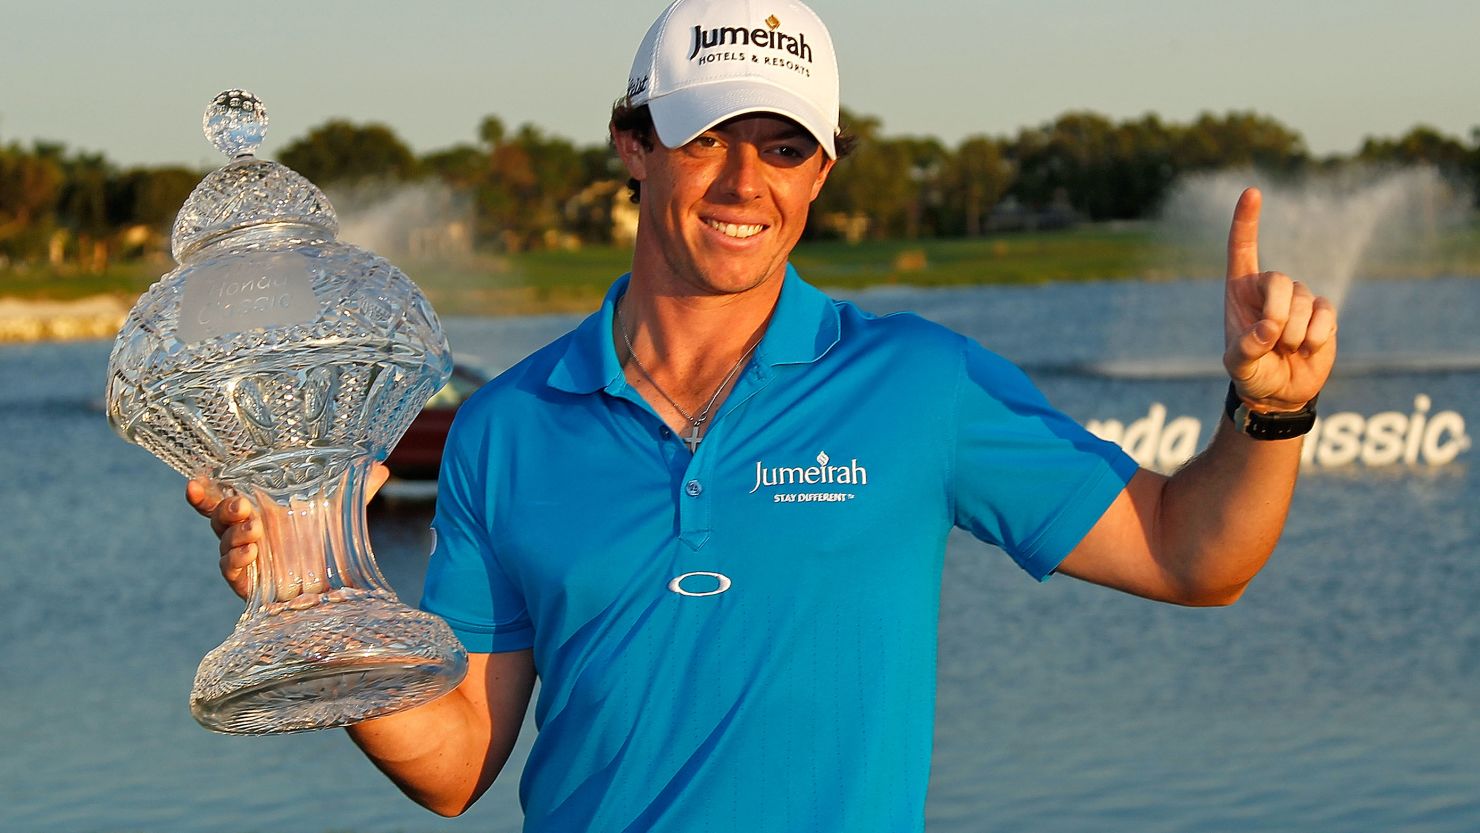 Rory McIlroy holds the trophy aloft after winning the Honda Classic in Florida.